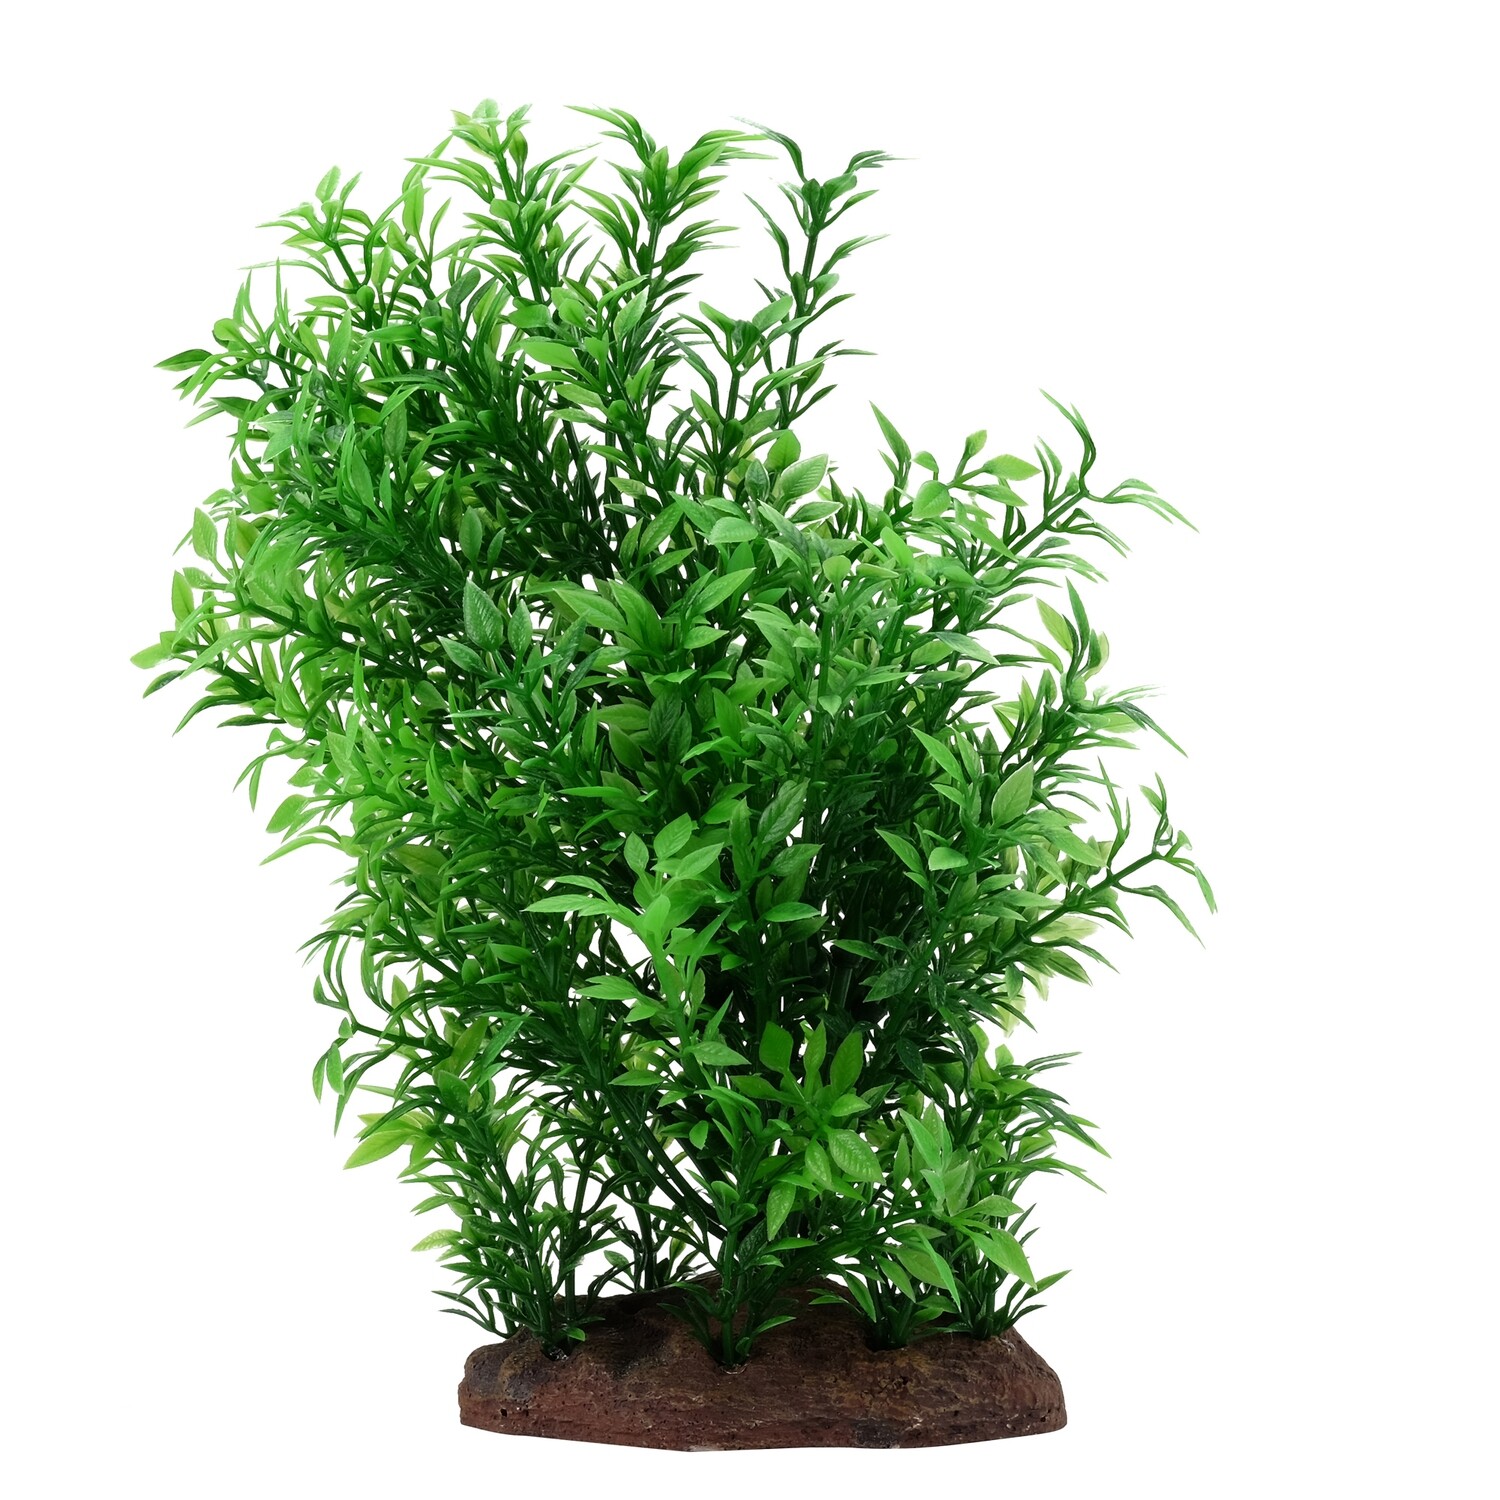 Fluval Aqualife Plant Scapes Small Helzine Plant - 20 cm (8 in)